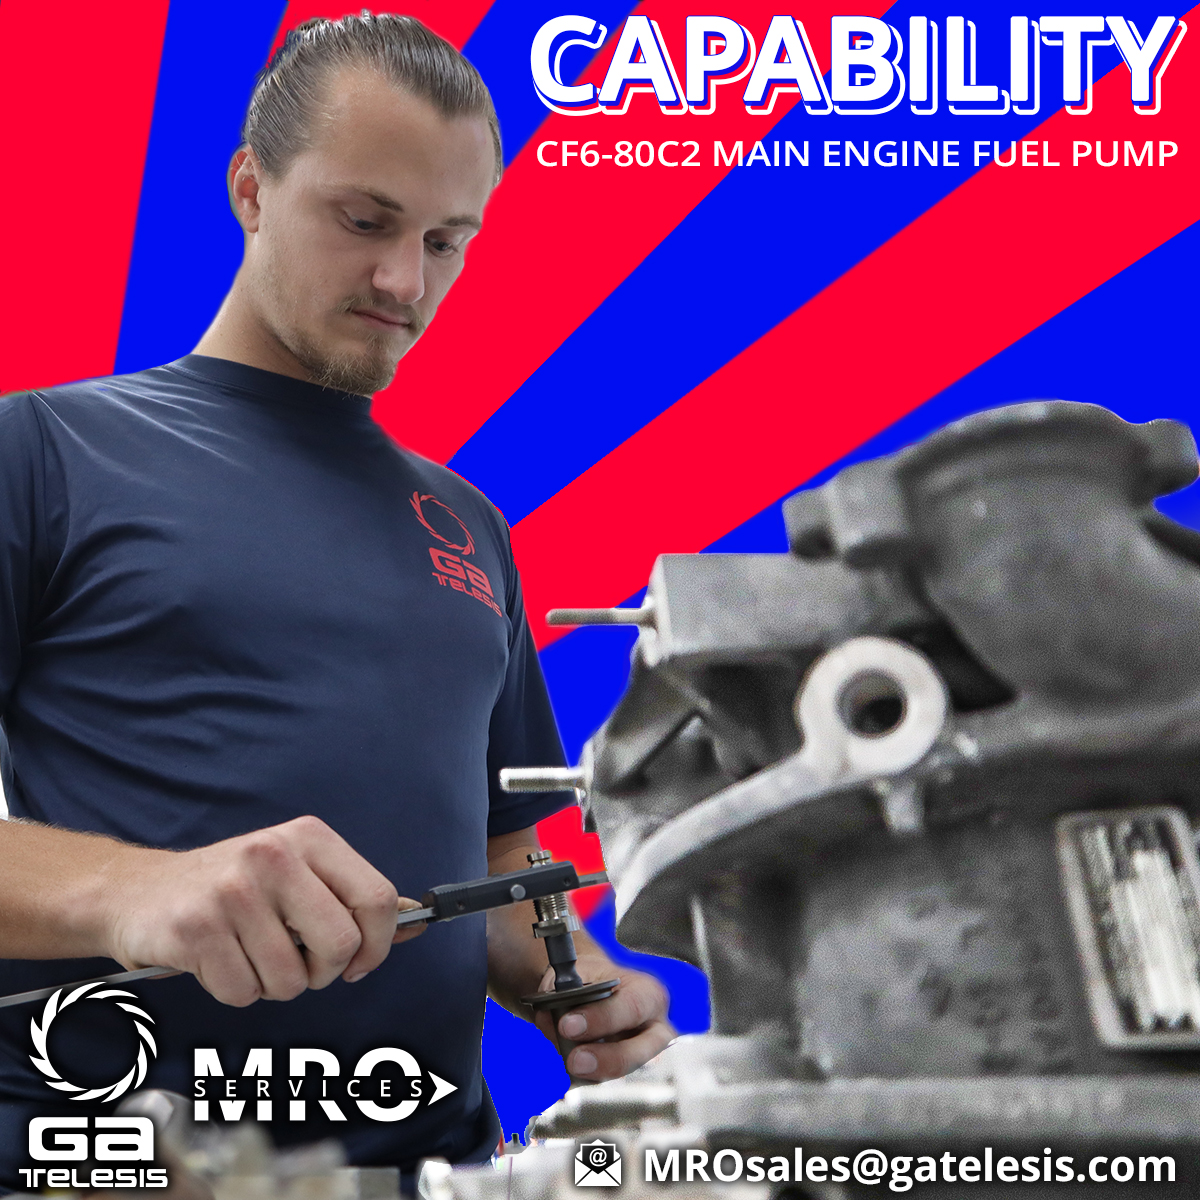 SUPERIOR CF6-80C2 Main Engine Fuel Pump repairs are at your service! EMAIL MROsales@gatelesis.com & visit our website: ow.ly/iznv50Os57A

#GATelesis #Aviation #Engineering #Airlines #Aircraft #AviationIndustry #AircraftMaintenance #Airline #Airplane #AviationMaintenance